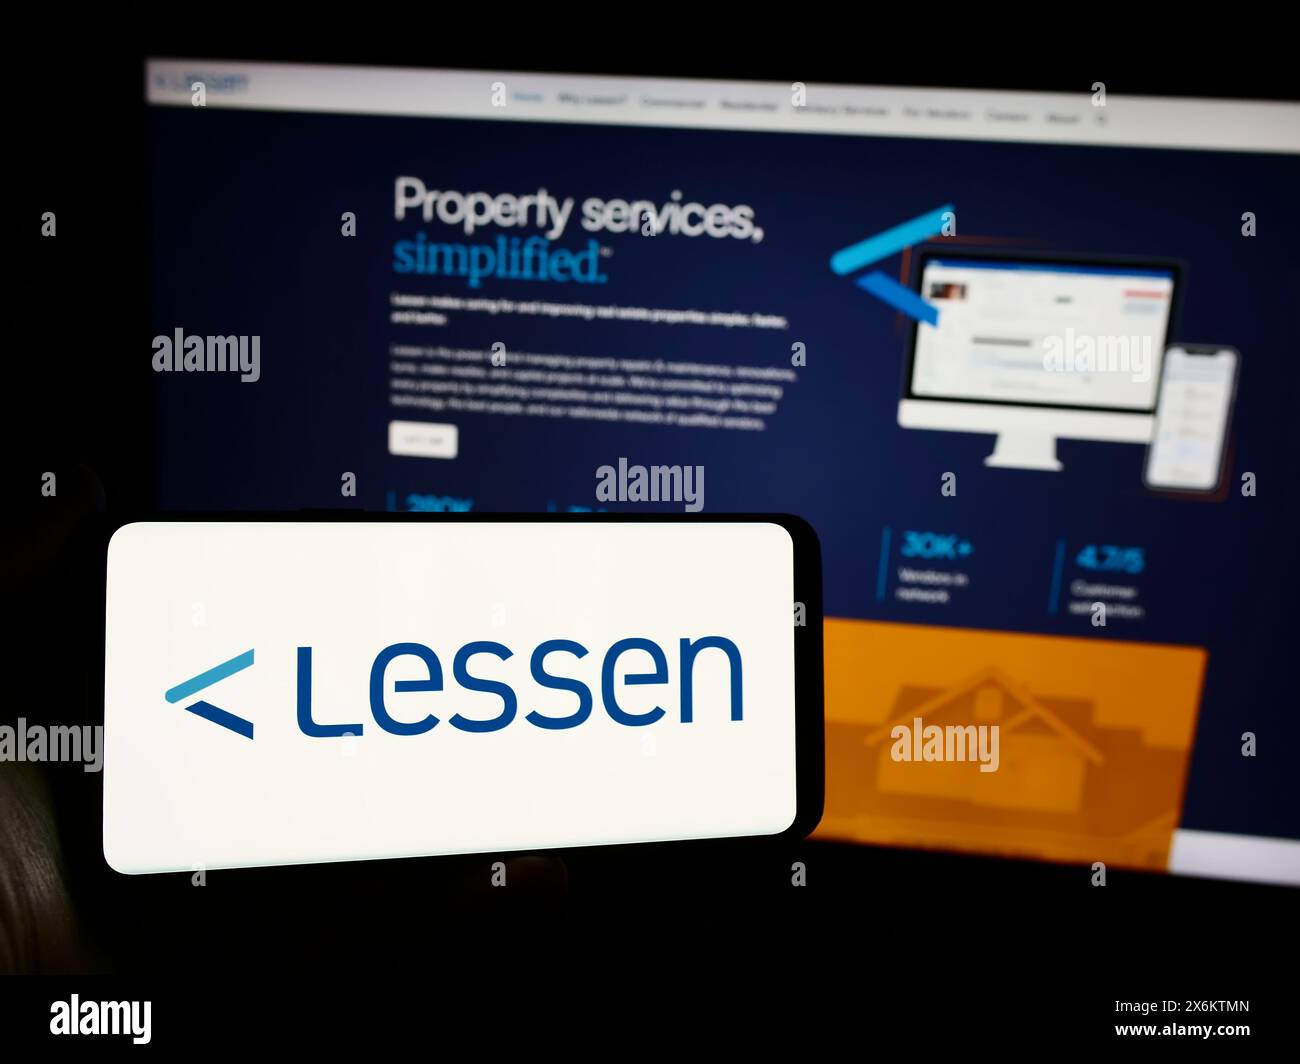 Person holding mobile phone with logo of American property services marketplace company Lessen Inc. in front of web page. Focus on phone display. Stock Photo